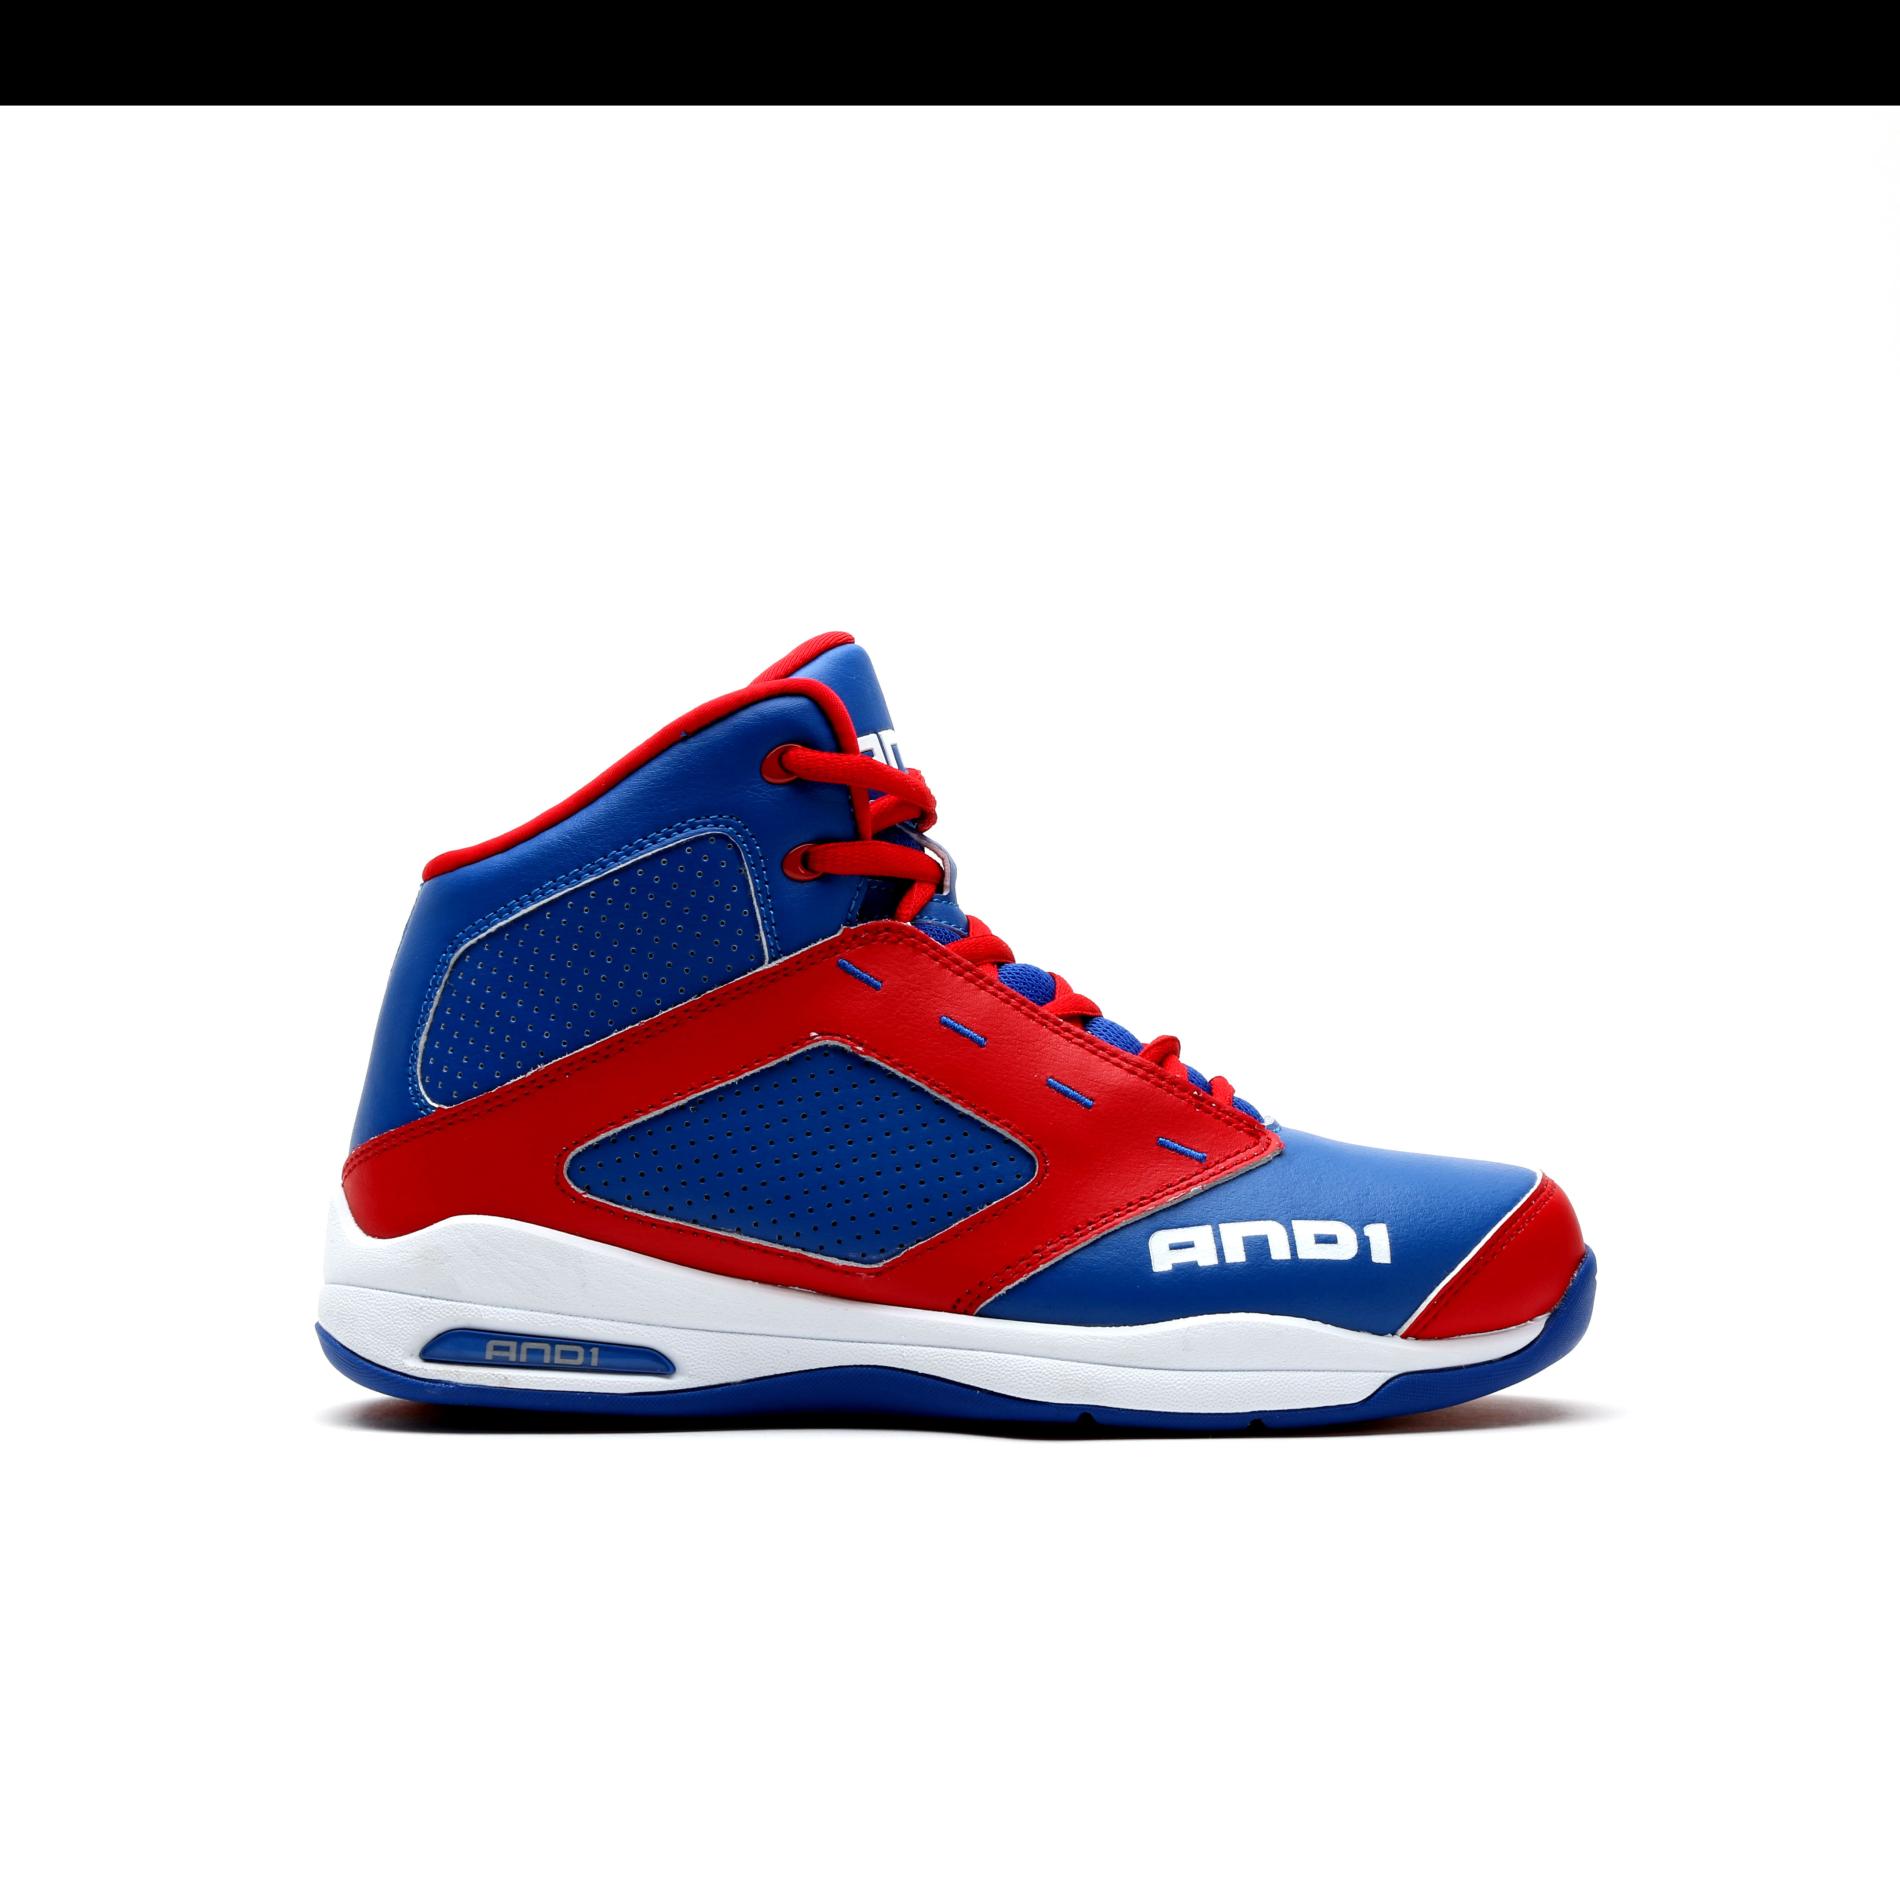 AND 1 Boy's Typhoon Blue/Red High-Top Athletic Shoe